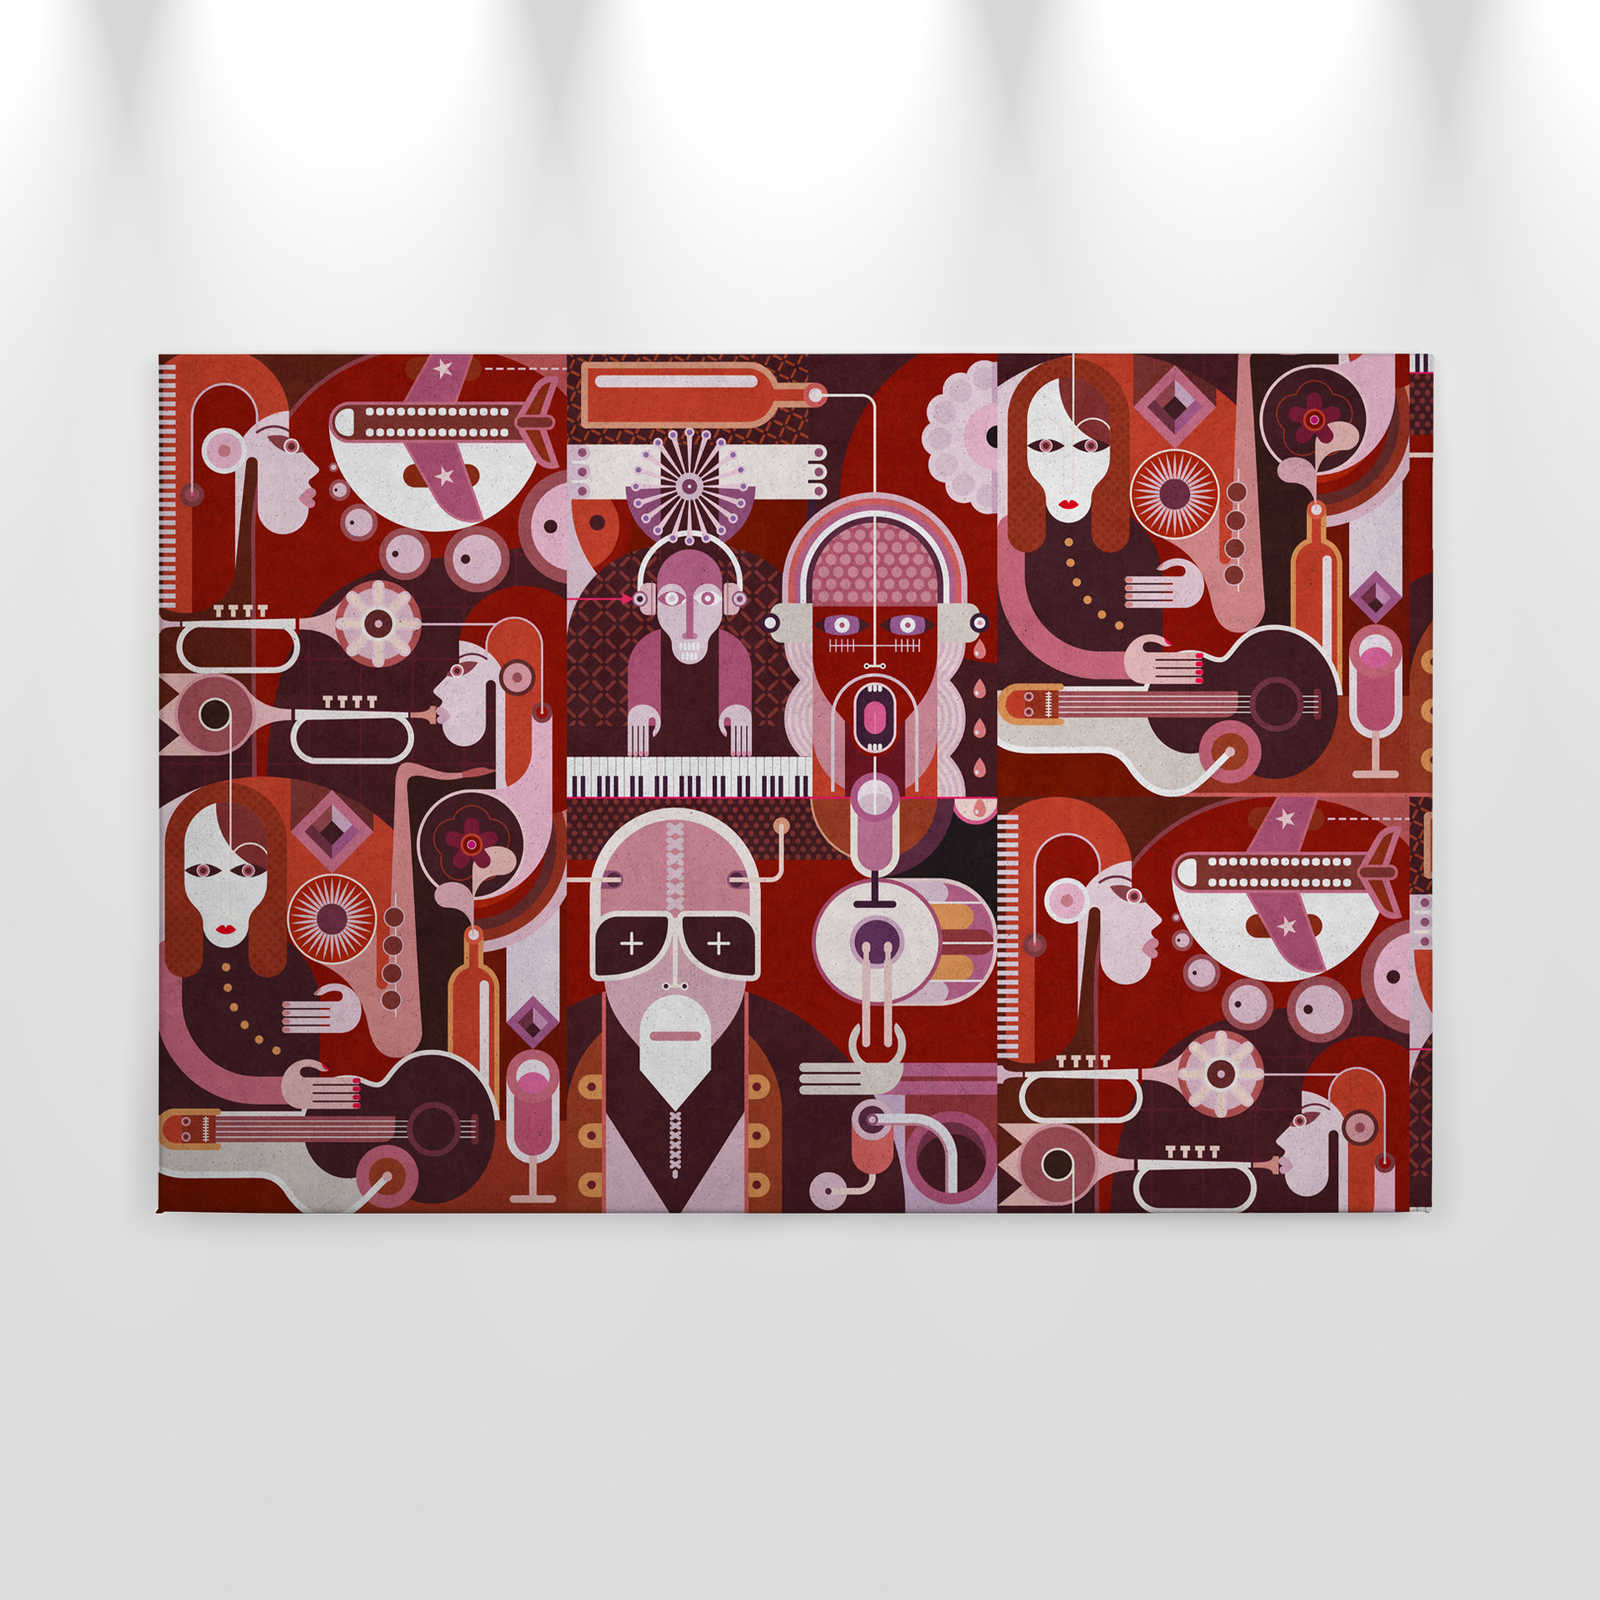             Wall of sound 2 - Abstract canvas painting with faces in concrete structure - 0.90 m x 0.60 m
        